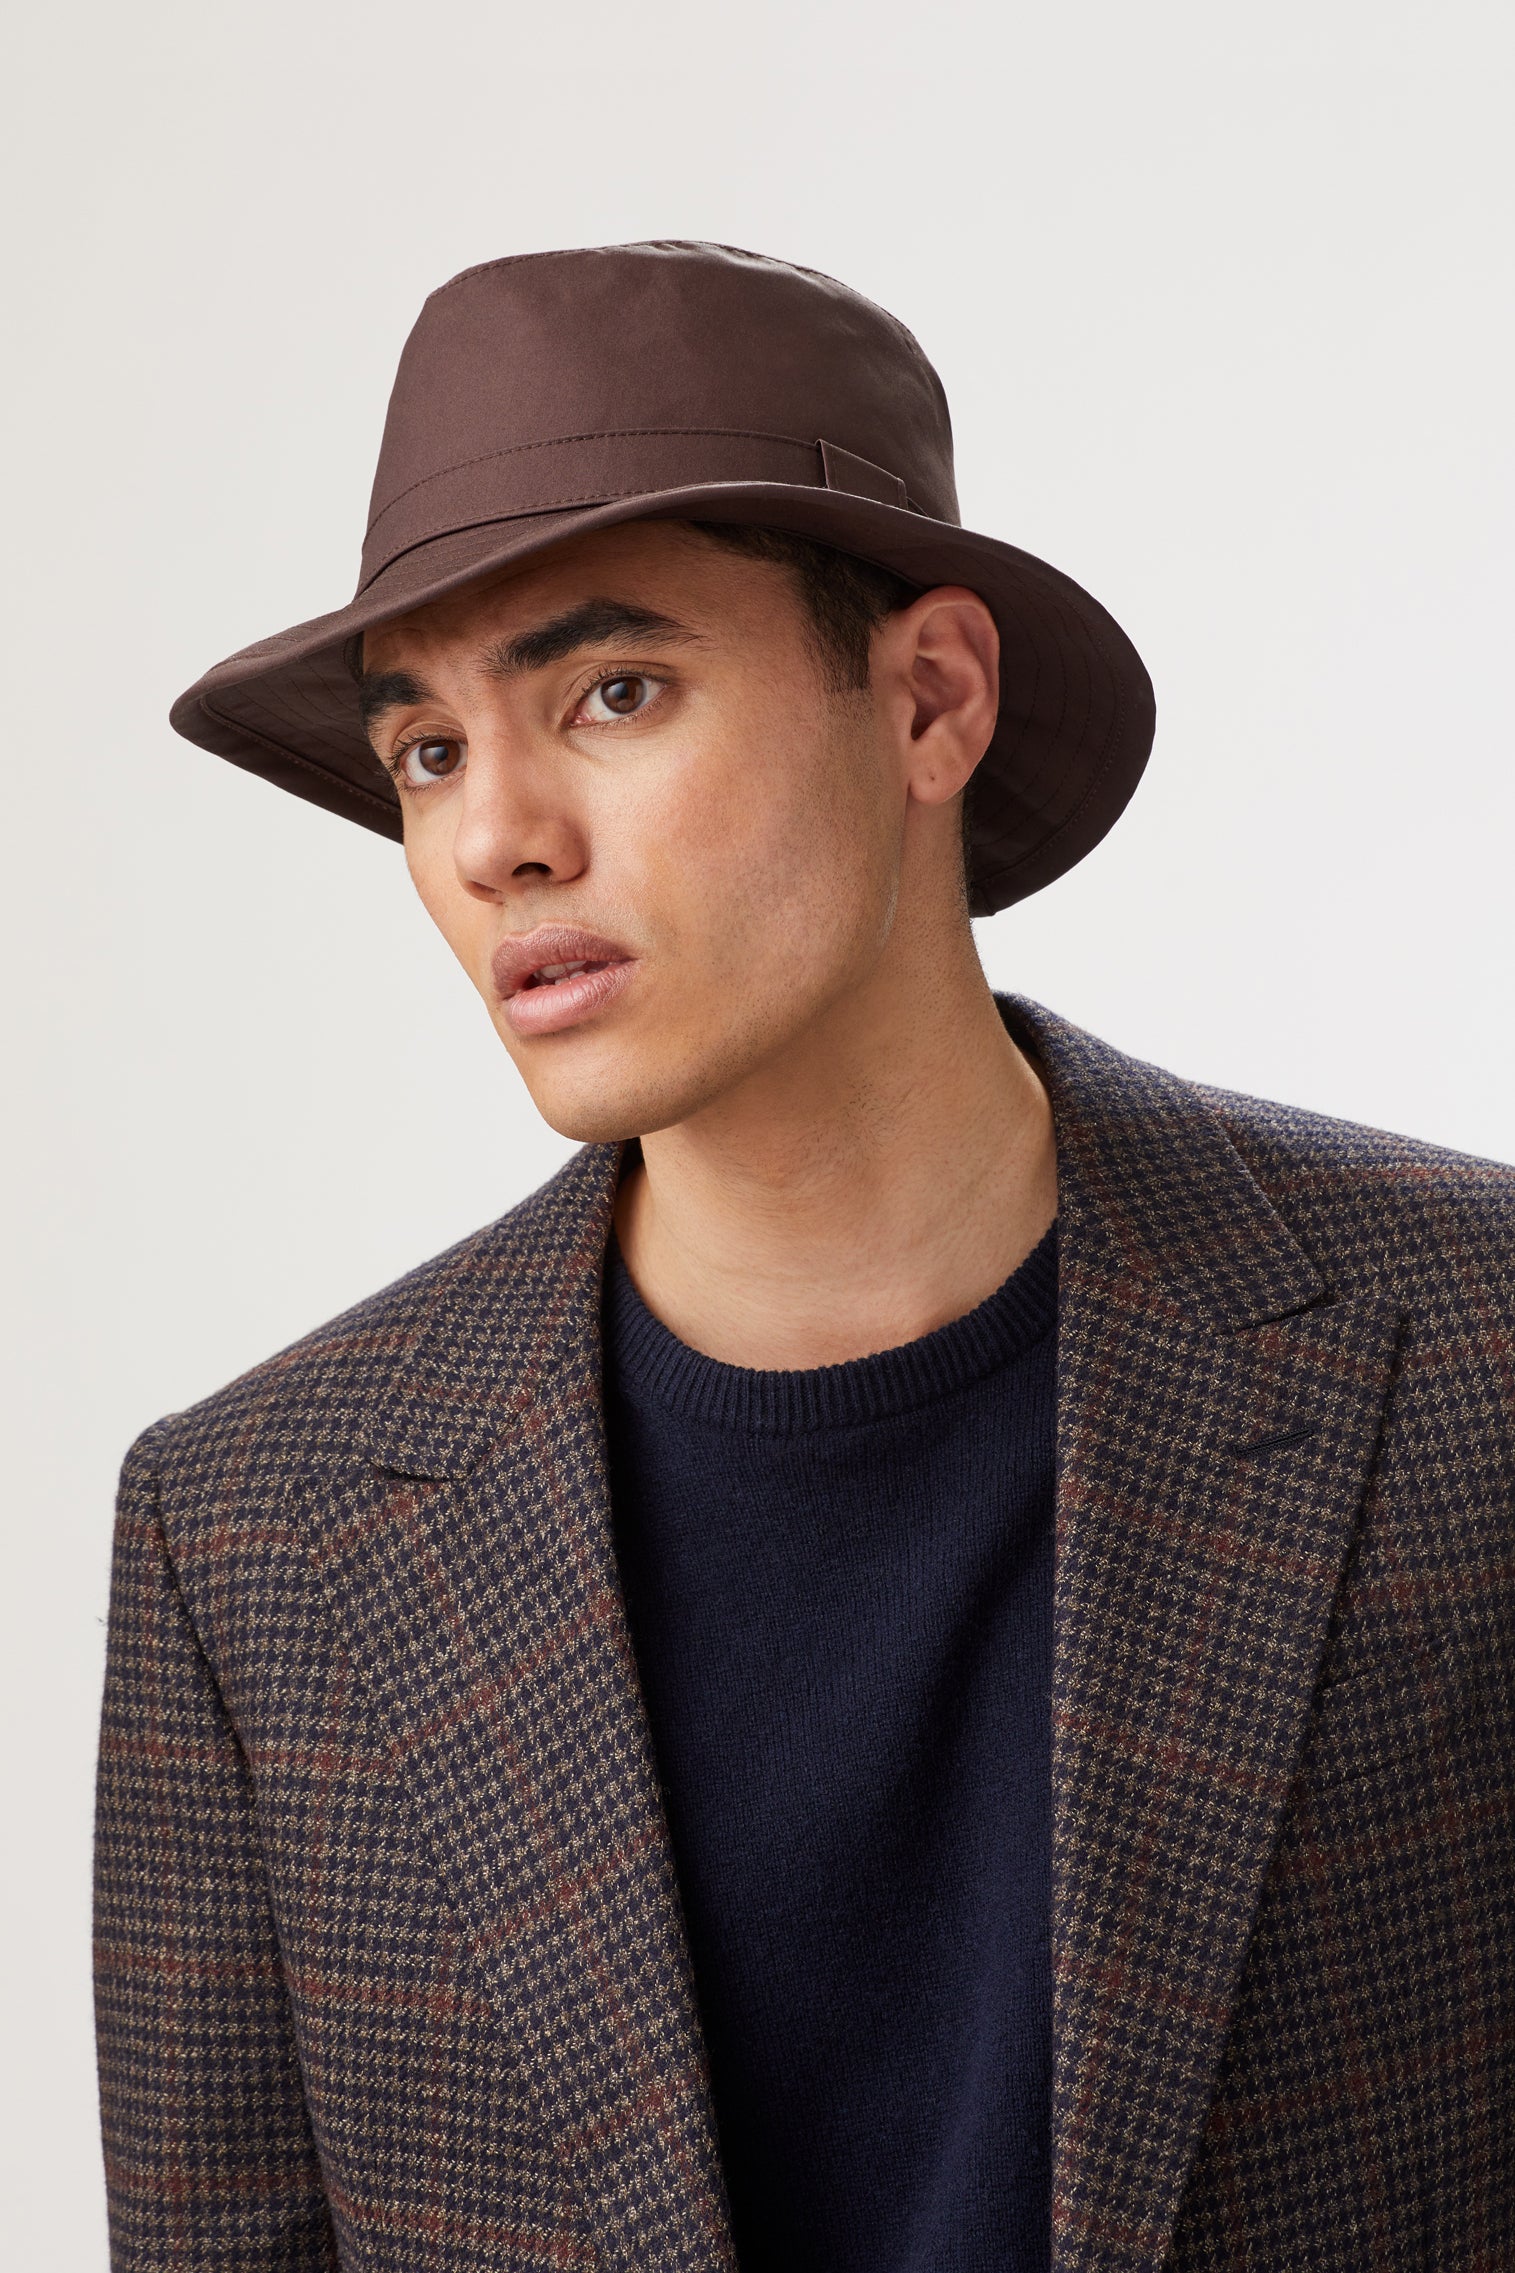 Tay GORE-TEX Hat - Hats for Long Face Shapes - Lock & Co. Hatters London UK